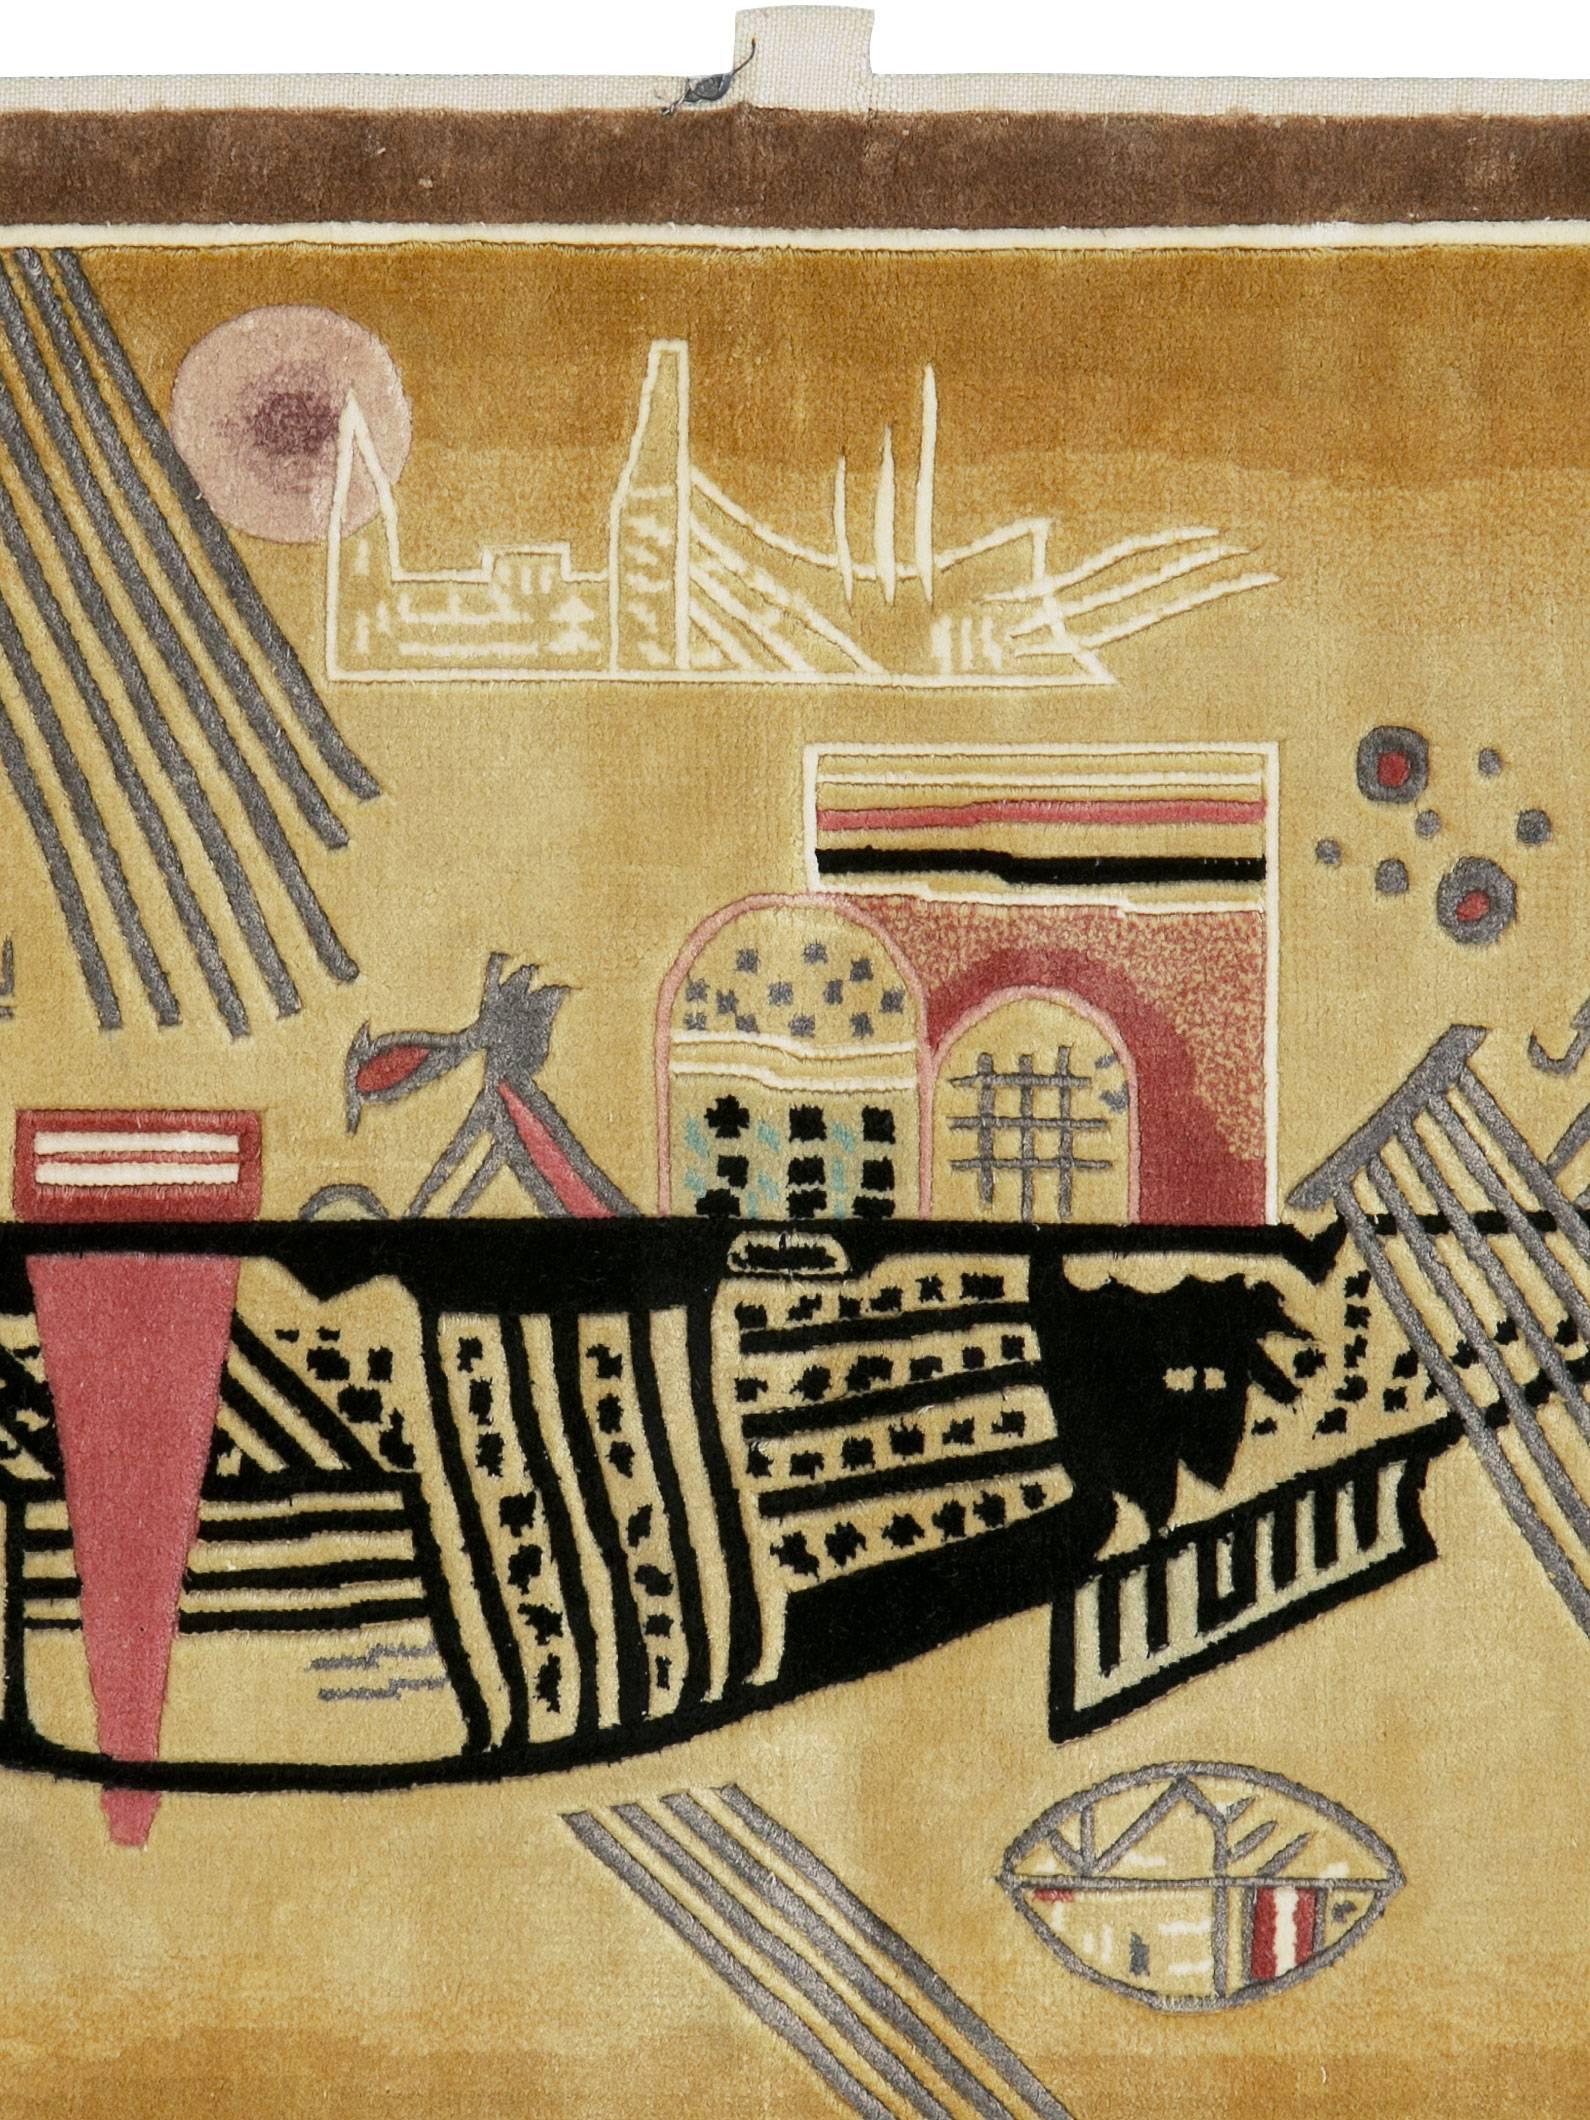 A modern silk wall hanging rug after Wassily Kandinsky's Capricious, circa 1930. Green rays, a black boat or space ship, a distant sketchy townscape? Maybe anthropomorphic and zoomorphic motives on the golden tan ground signed ‘Kandinsky’.